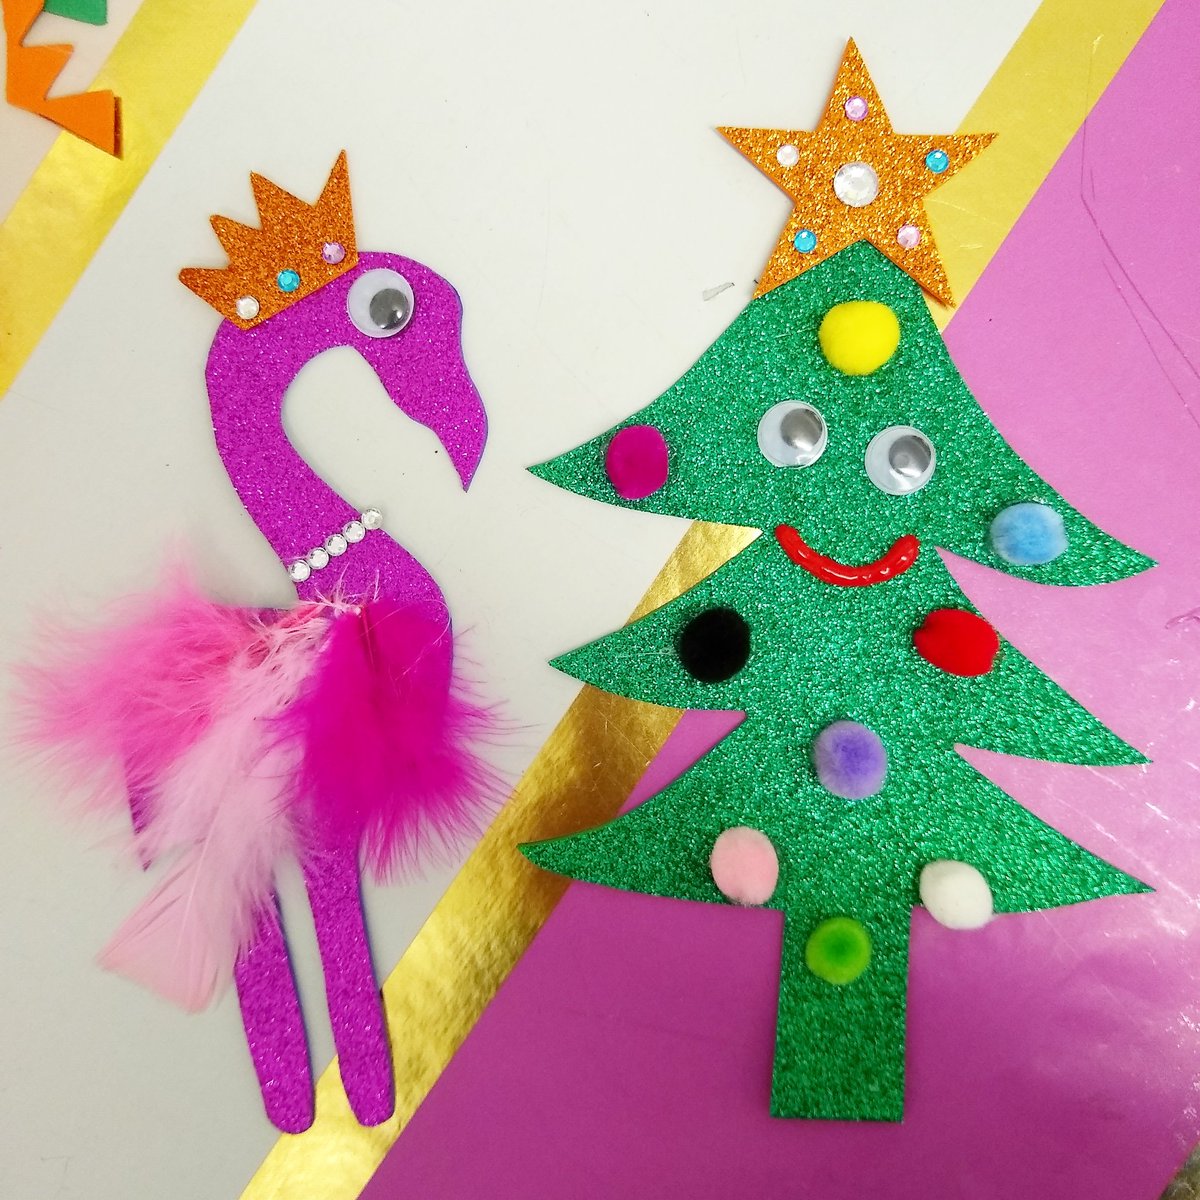 Kids & big kids craft workshop coming to @SAZmediaUK @merseyway @totallysk this weekend 1-4pm. There will be workshops, live music and beautiful handmade stocking fillers made by local artists #stockport #craftworkshop #shoplocal #merseyway #artforkids #craftparty #HandmadeHour